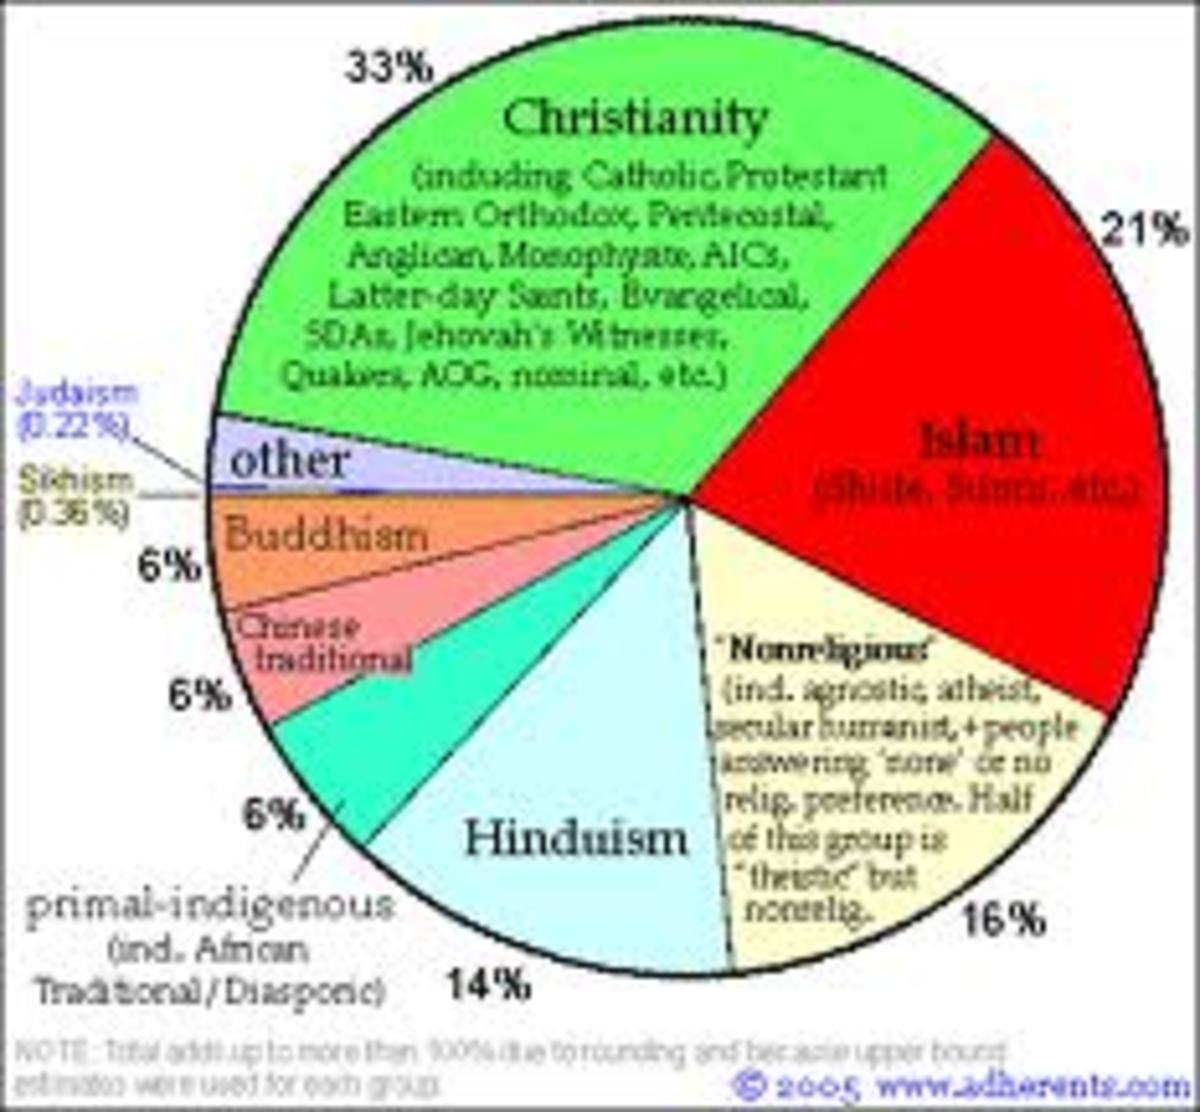 There are too many religions in our religious world, As you can see this sketch shows us the main religions and their worldwide percentage. 